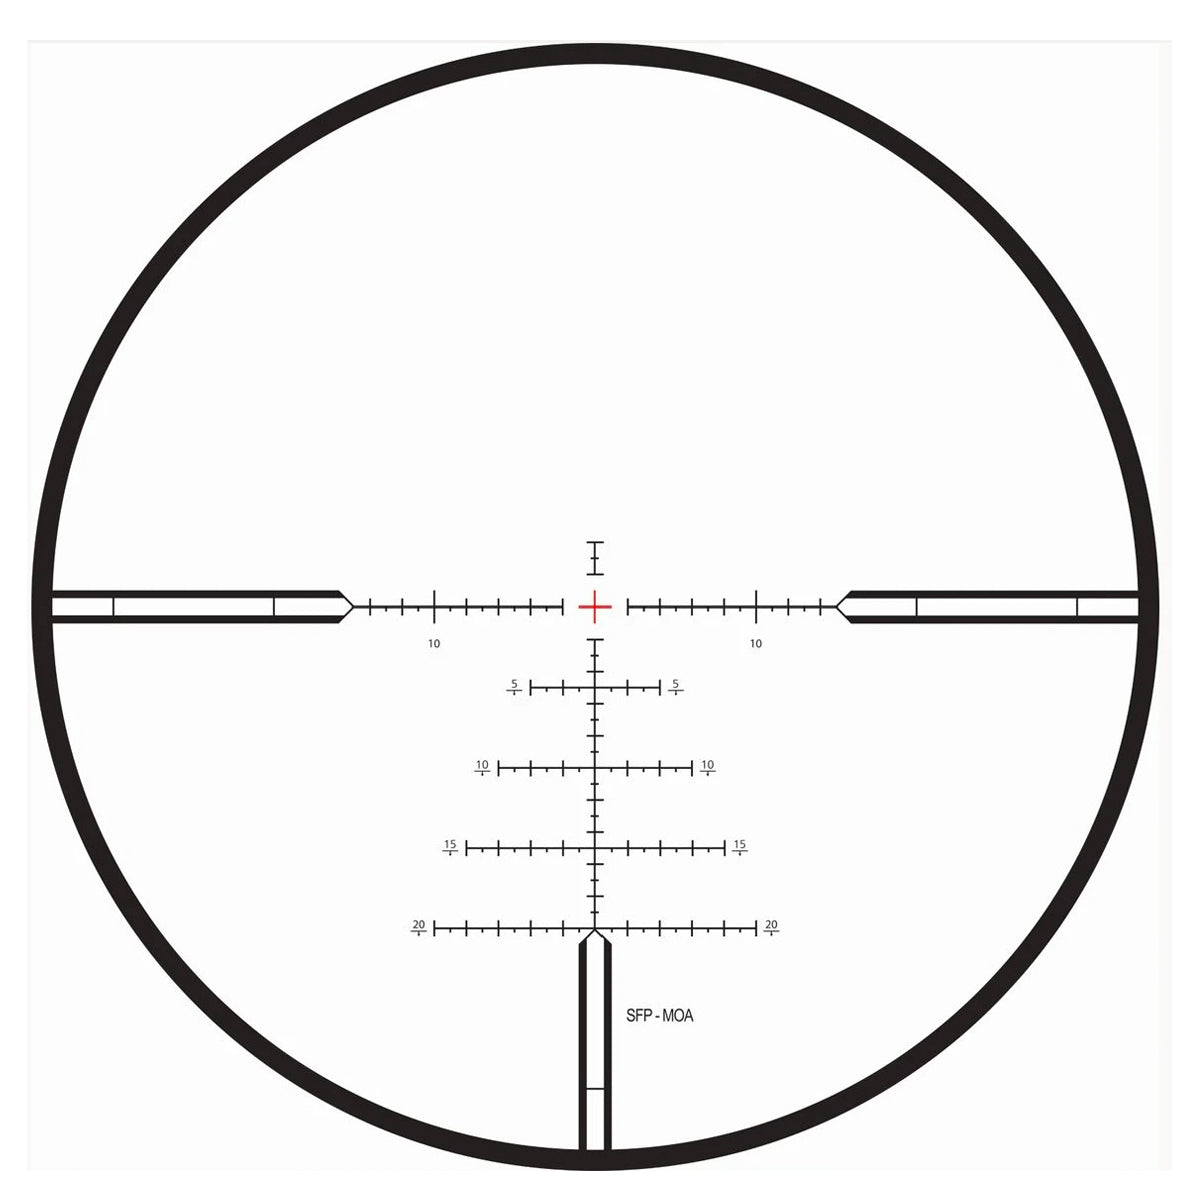 Zeiss Conquest V4 4-16x50 ZBi Illuminated #68 Reticle w/ Locking Turret in  by GOHUNT | Zeiss - GOHUNT Shop